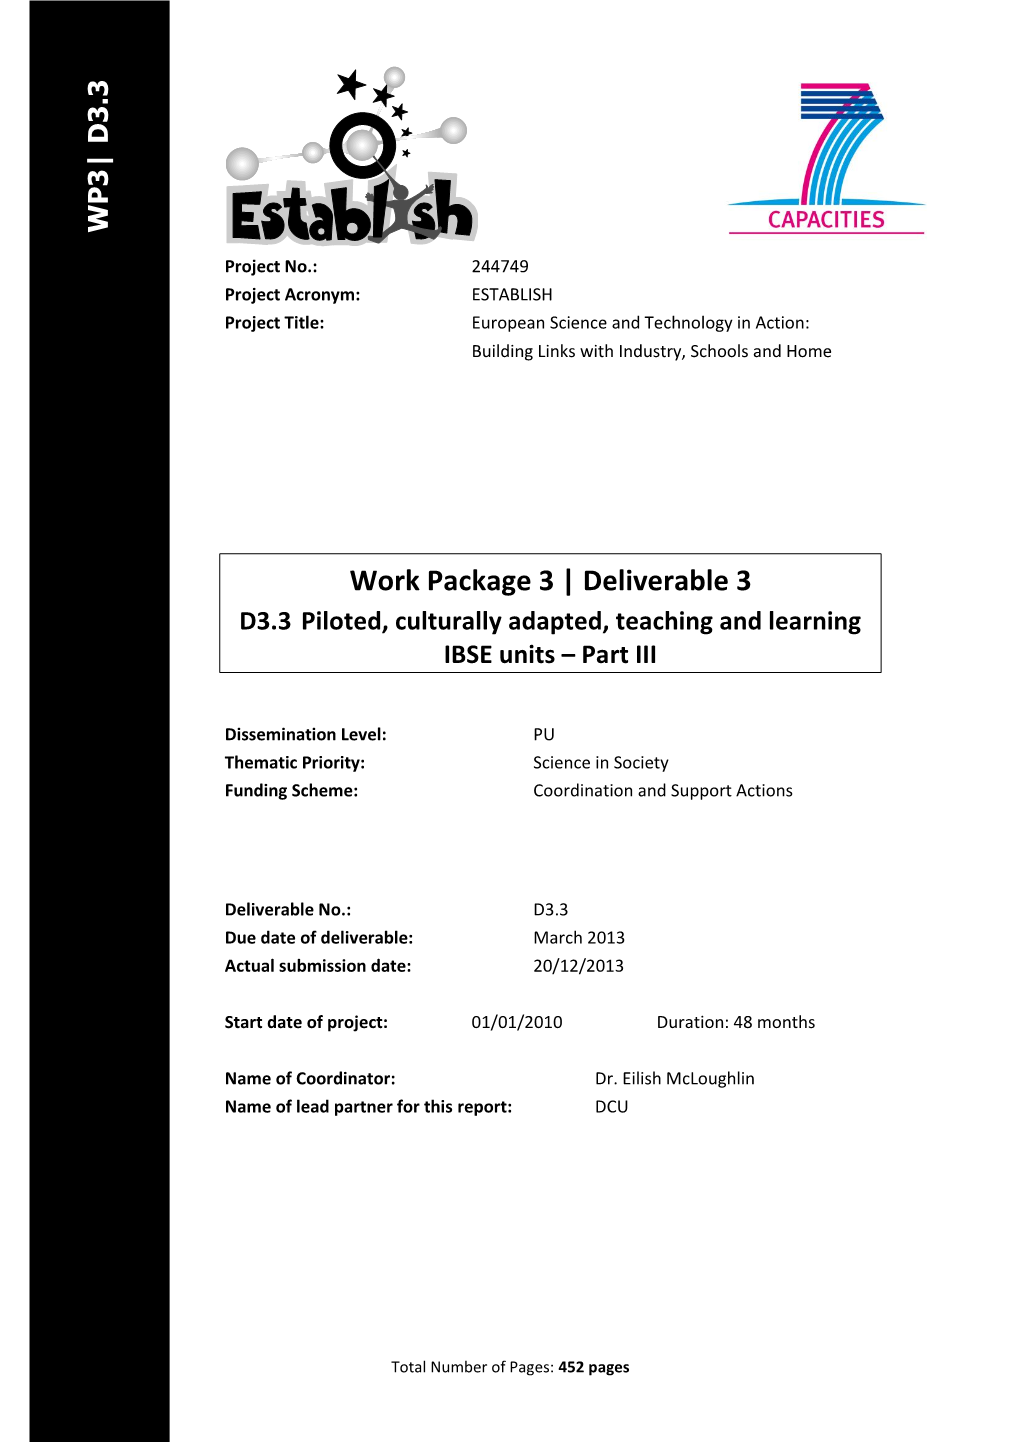 Work Package 3 | Deliverable 3 D3.3 Piloted, Culturally Adapted, Teaching and Learning IBSE Units – Part III